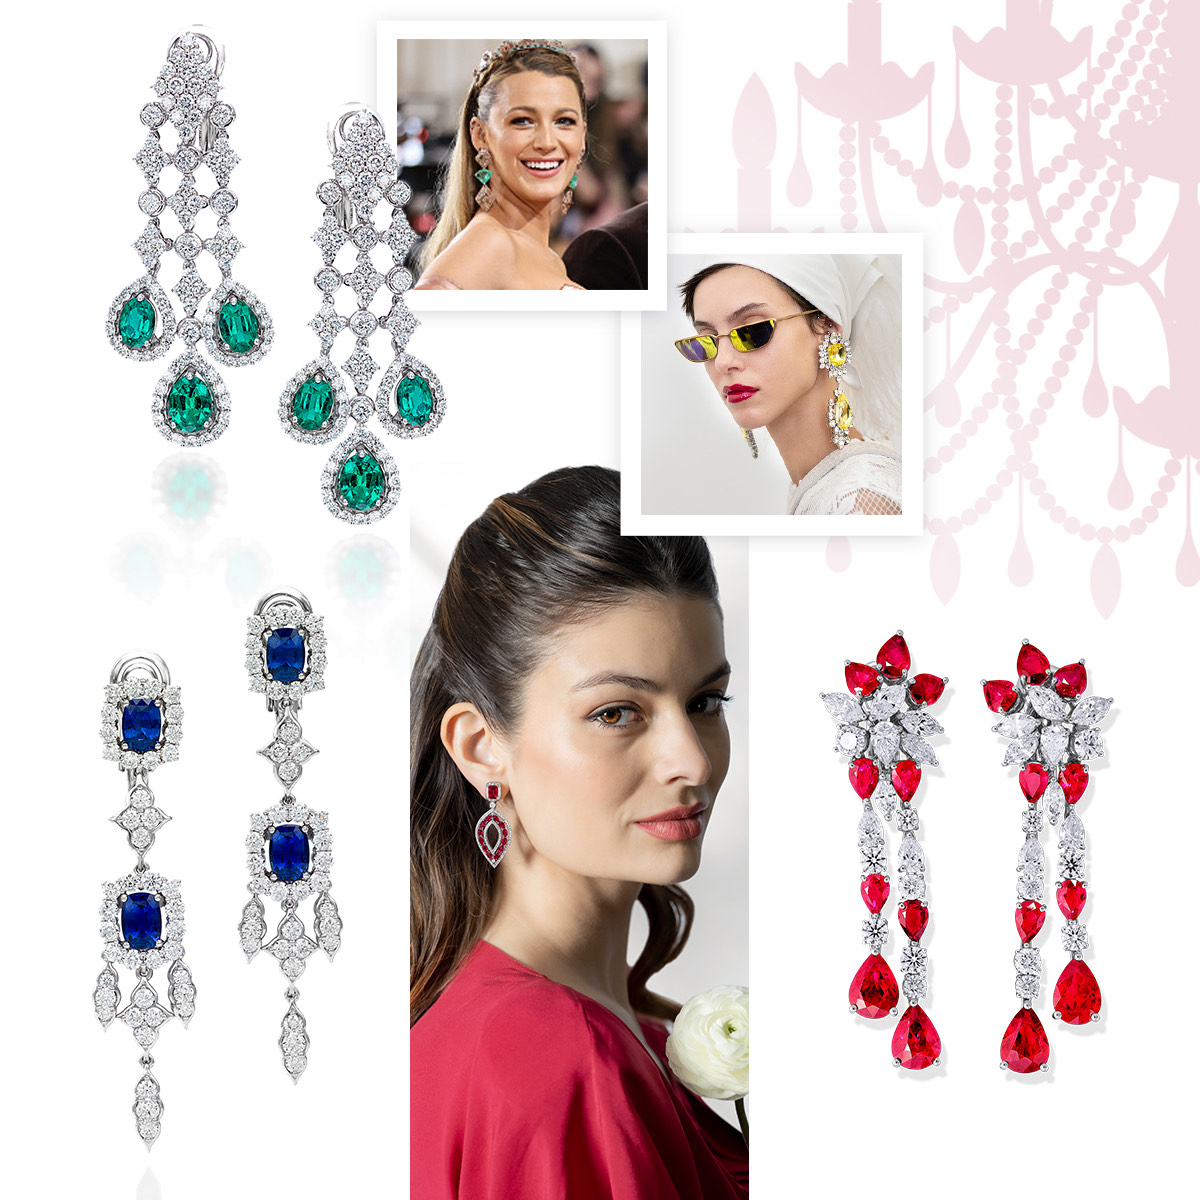 PICCHIOTTI emerald and diamond Chandelier earrings, Blake Lively at the 2022 Met Gala, Giambattista Valli S/S 2022, PICCHIOTTI ruby and diamond floral Chandelier earrings, model wearing PICCHIOTTI “Eclipse” ruby and diamond Chandelier earrings, PICCHIOTTI sapphire and diamond Chandelier earrings